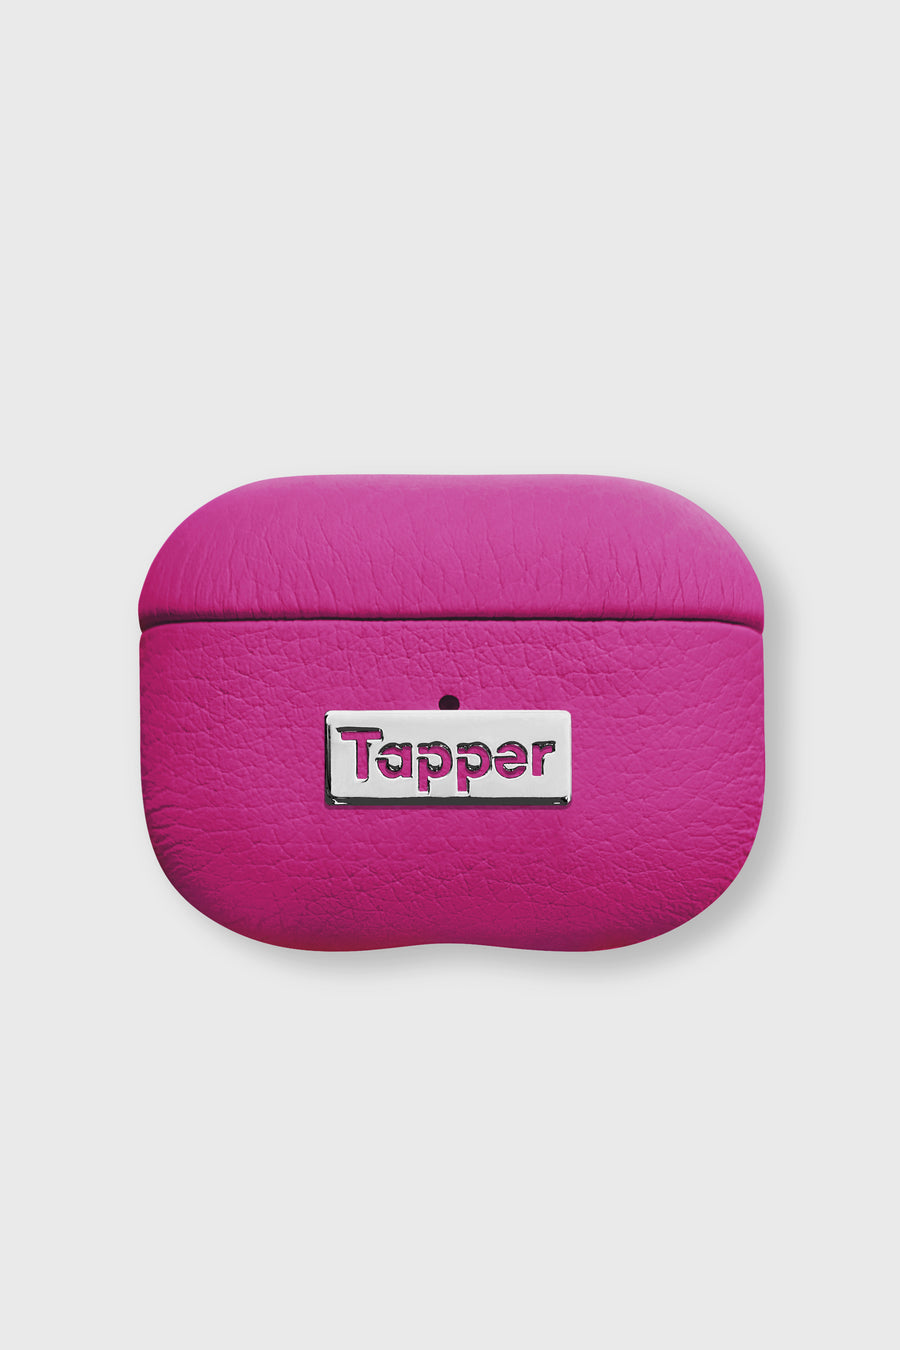 Tapper's luxurious hot pink genuine lamb leather AirPods Pro case protects and elevates the look of your AirPods Pro. The luxurious, protective case for AirPods Pro with a metal logo plate colored in silver steps up your AirPods game. The next must-have high end protective Apple AirPods accessory in bright pink real leather and metal details. Compatible with AirPods Pro. Designed in Sweden by Tapper. Free Express Shipping at gettapper.com